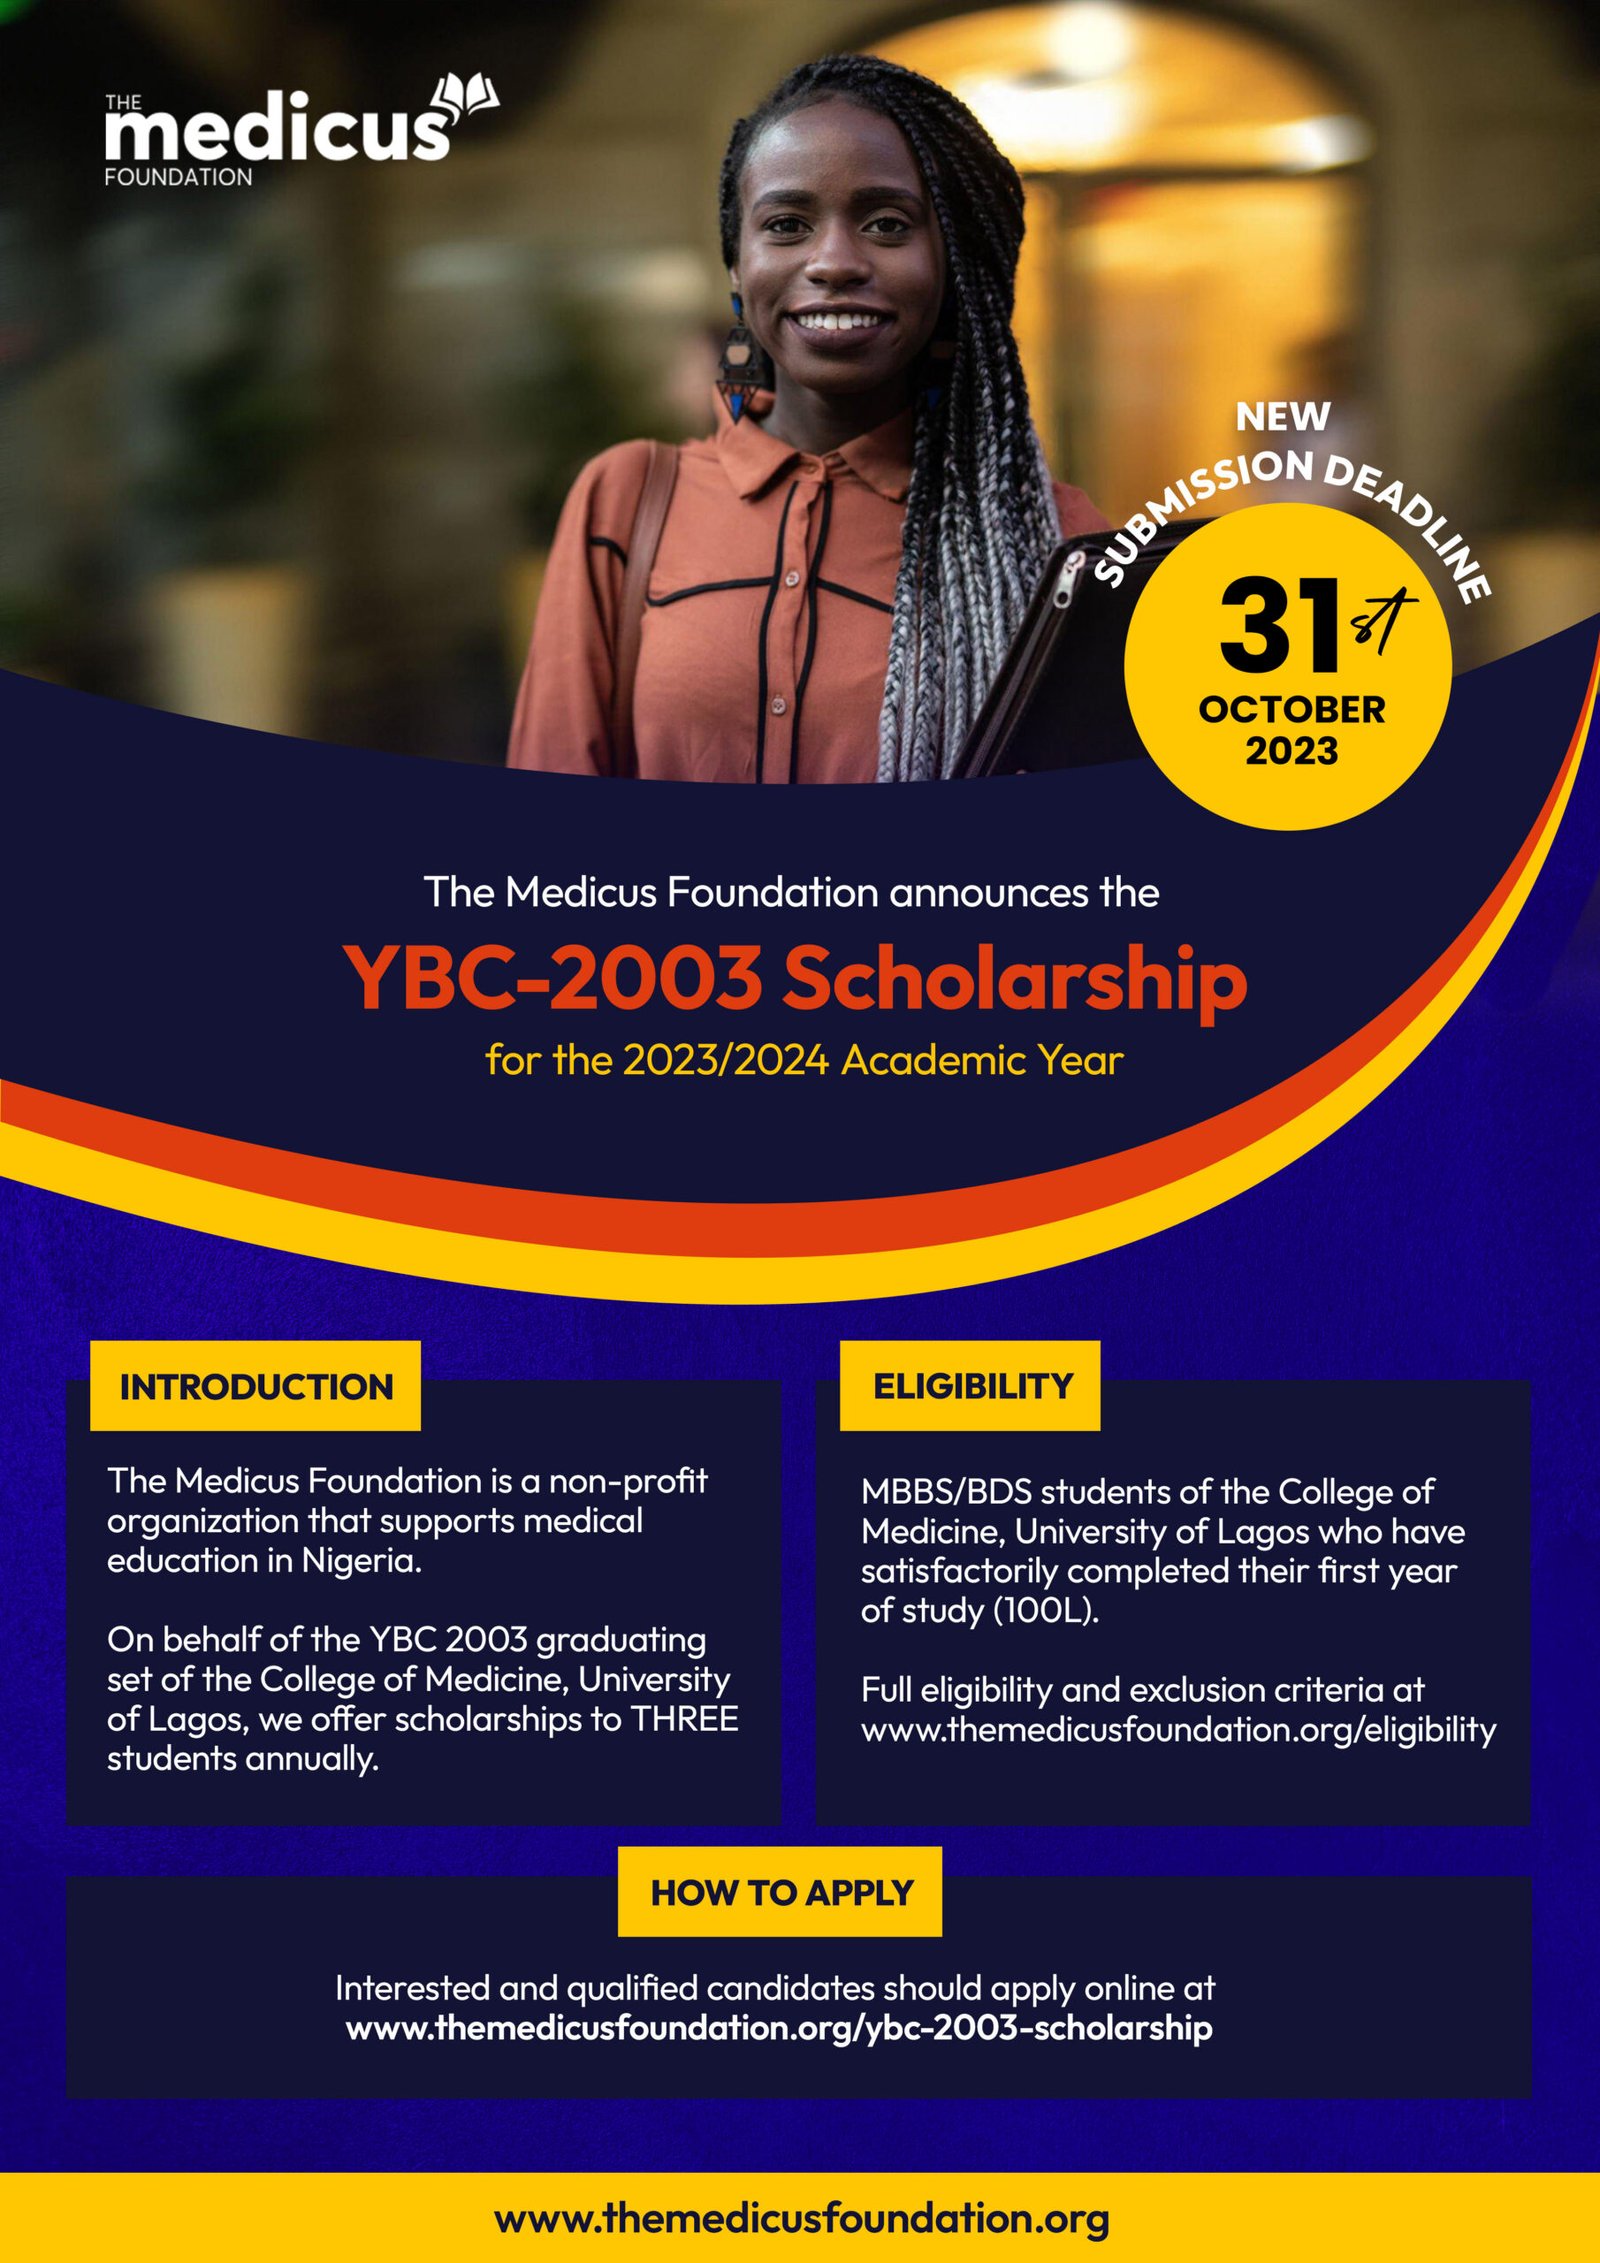 Poster detailing information on the YBC 2003 Scholarship 